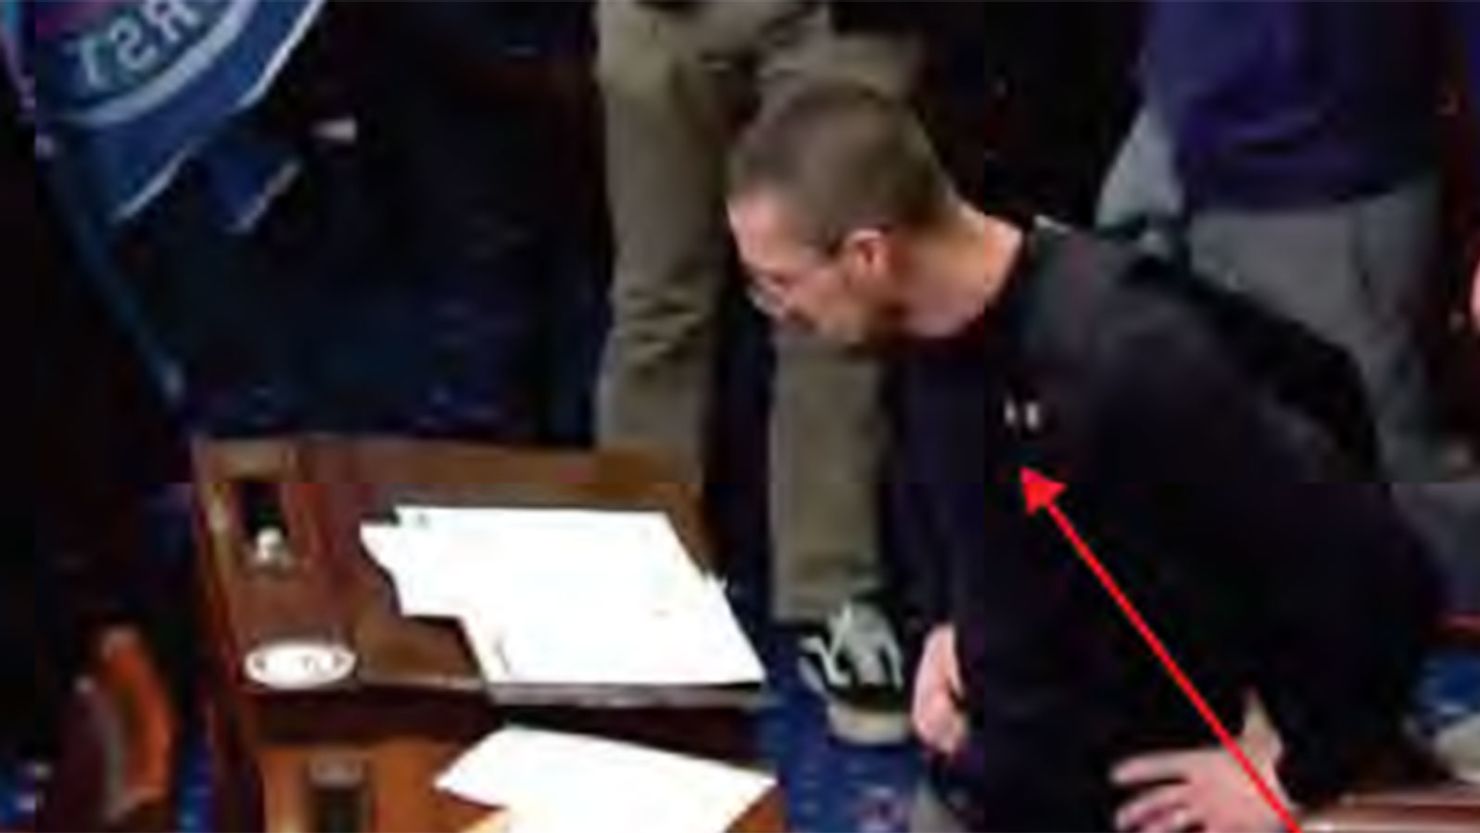 Jerod Wade Hughes is seen on the Senate floor in an image from the criminal complaint.